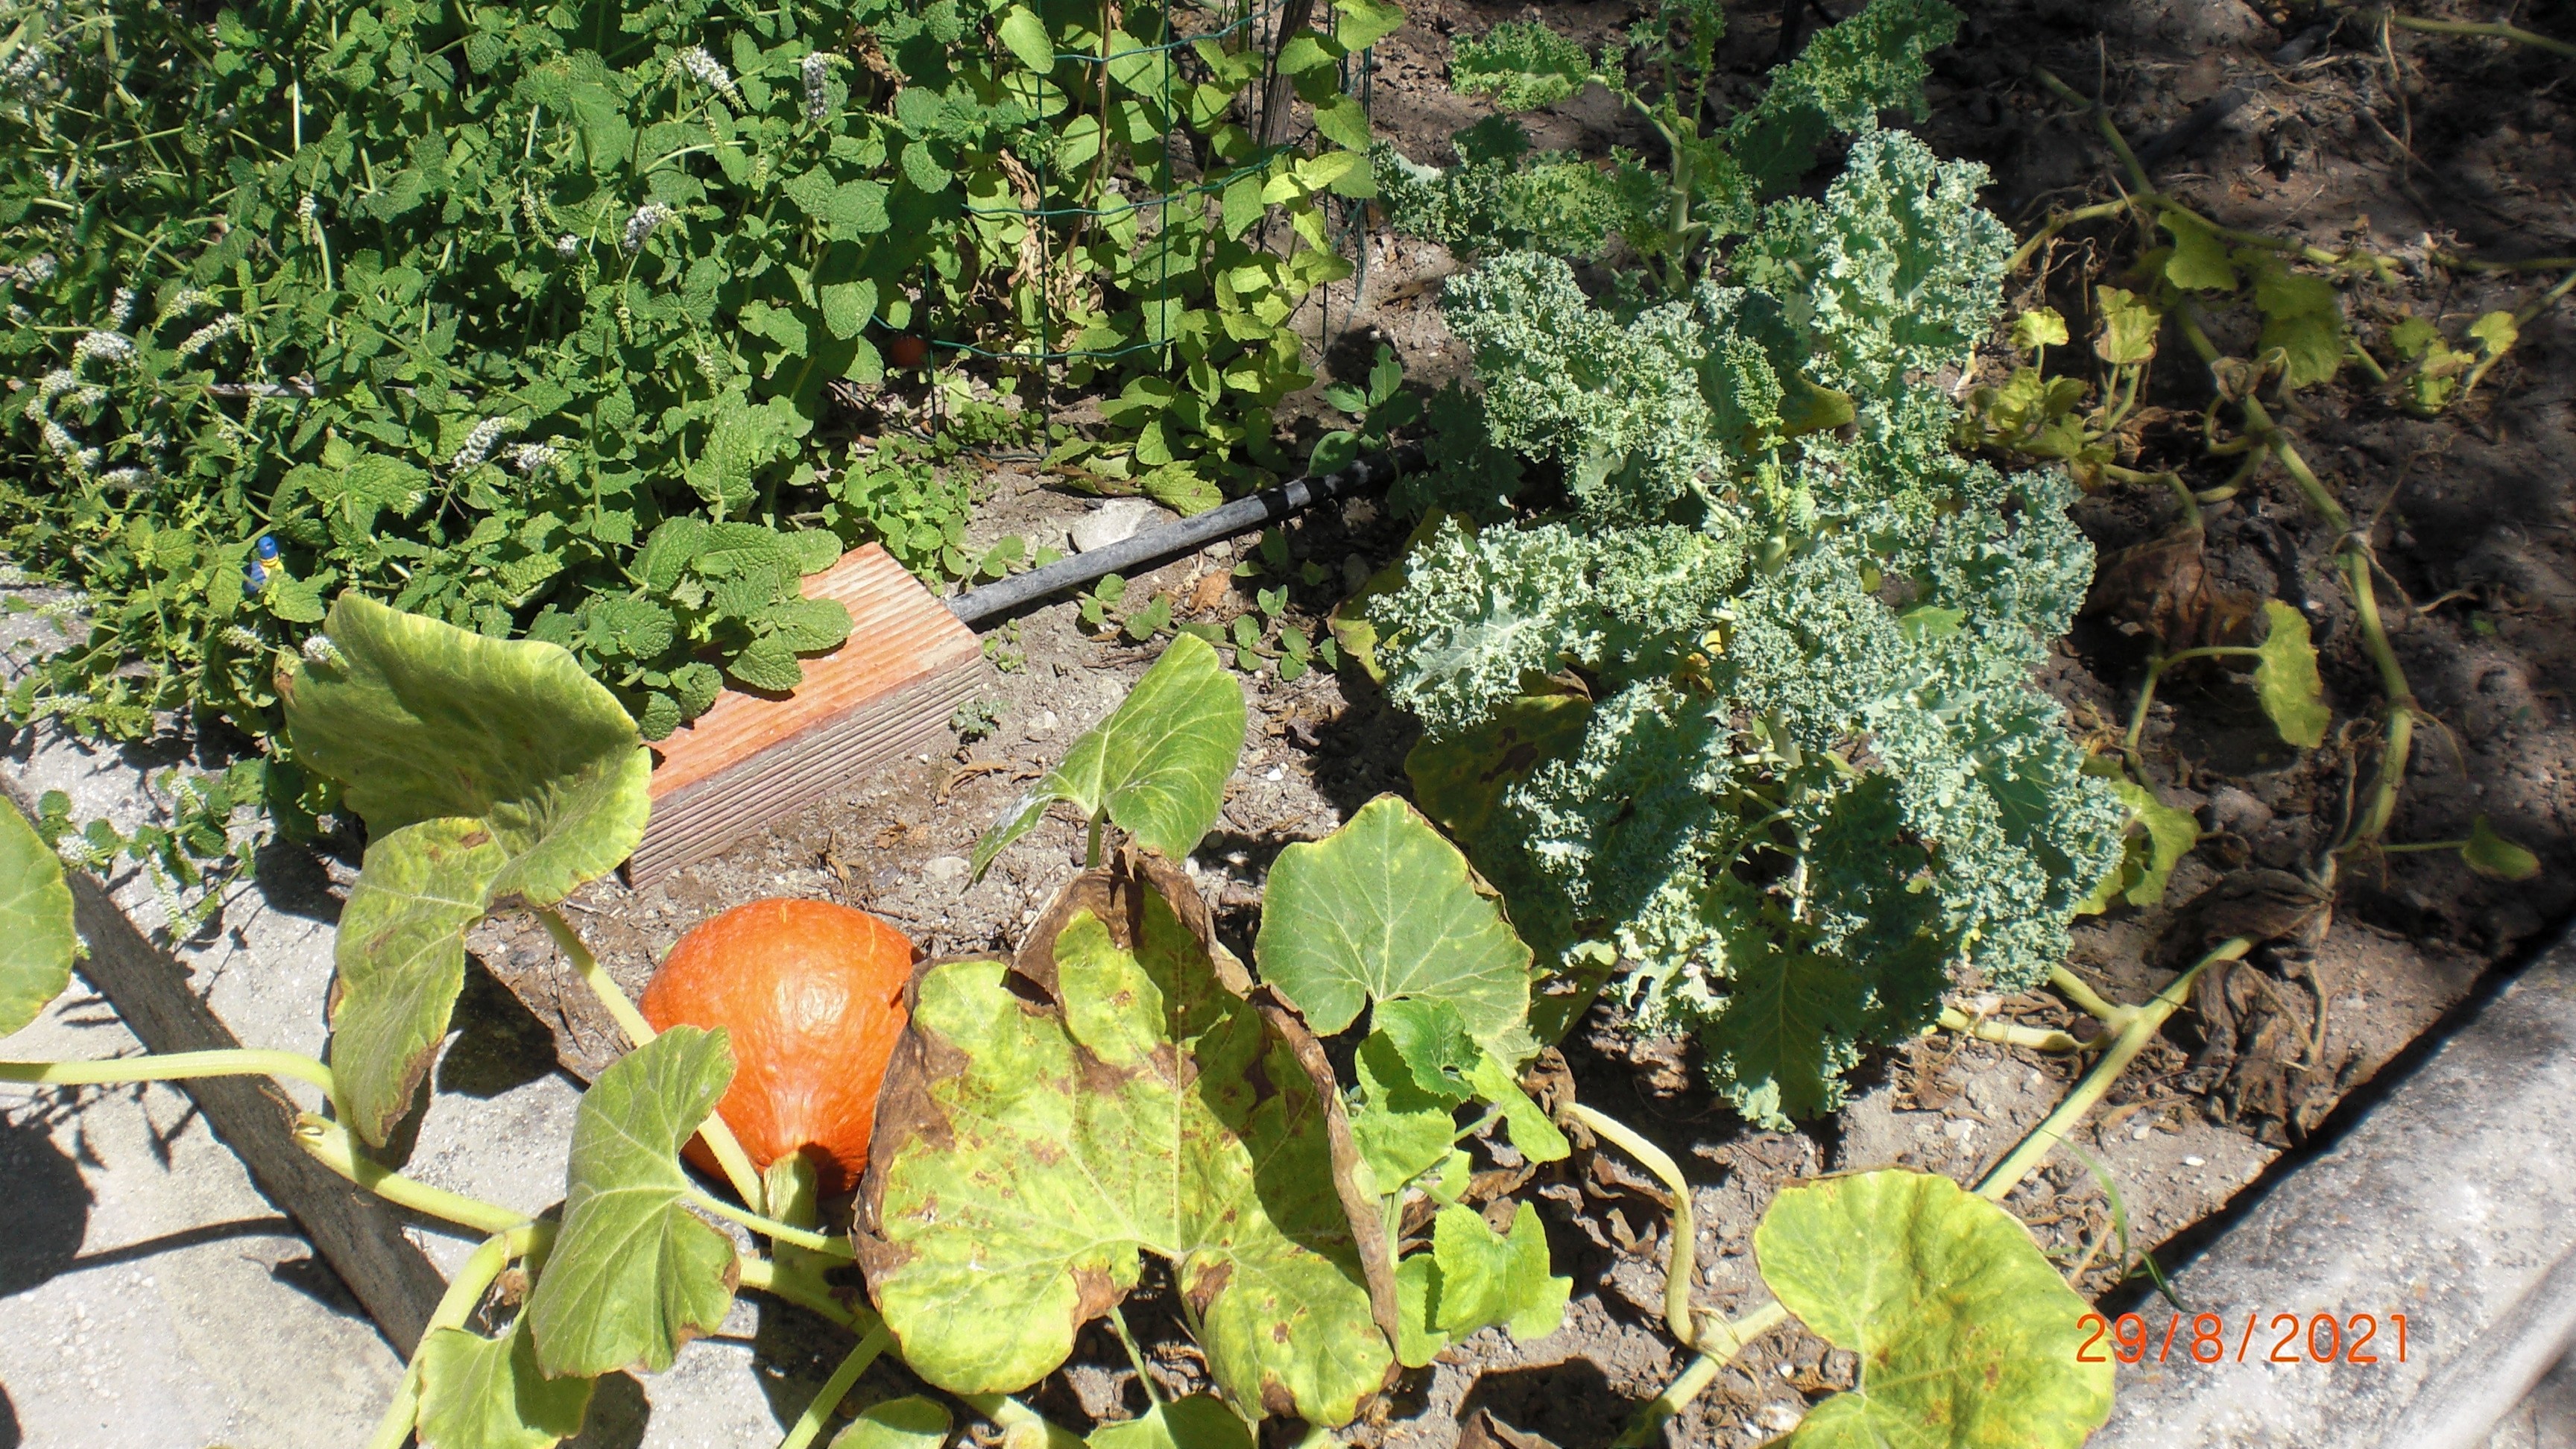 Kale and Squash in my vegetable garden